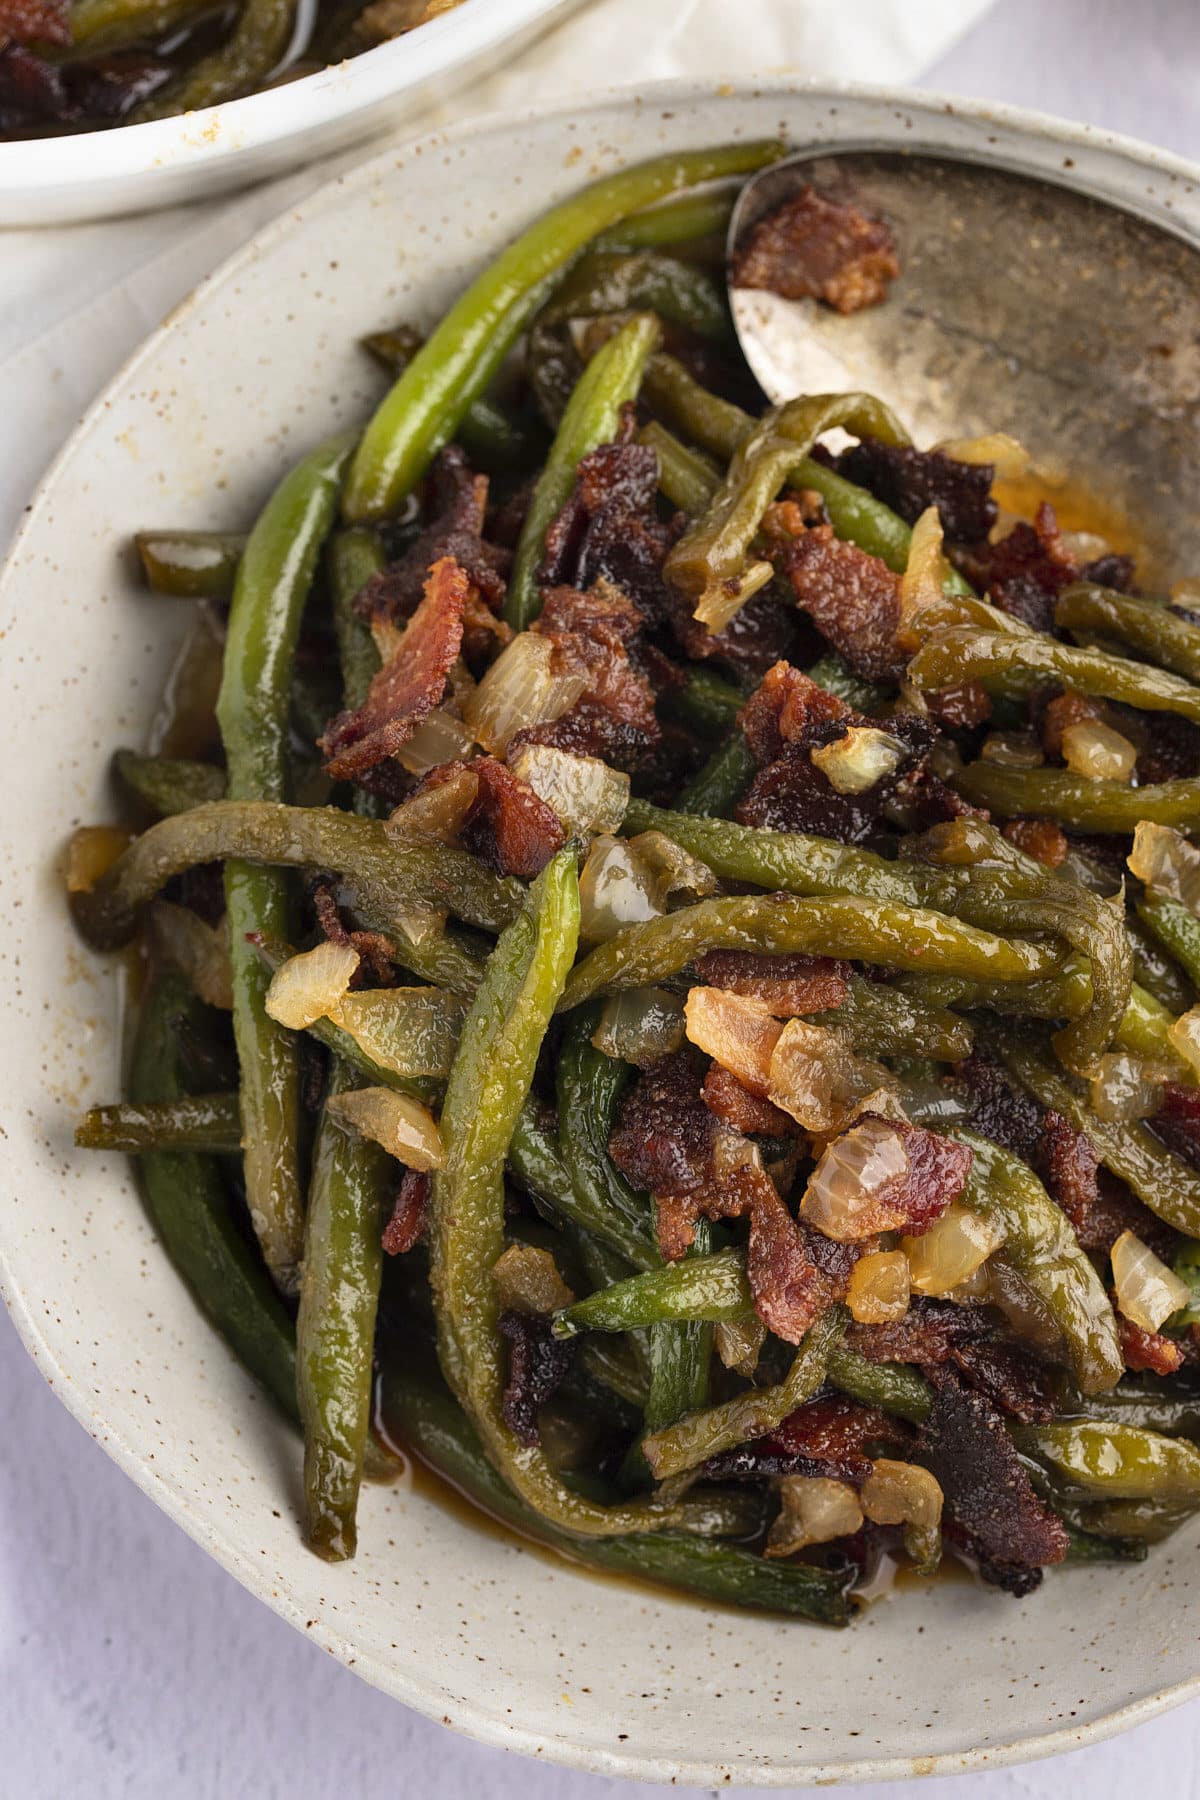 A spoon in a bowl of baked green beans, bacon and onions.